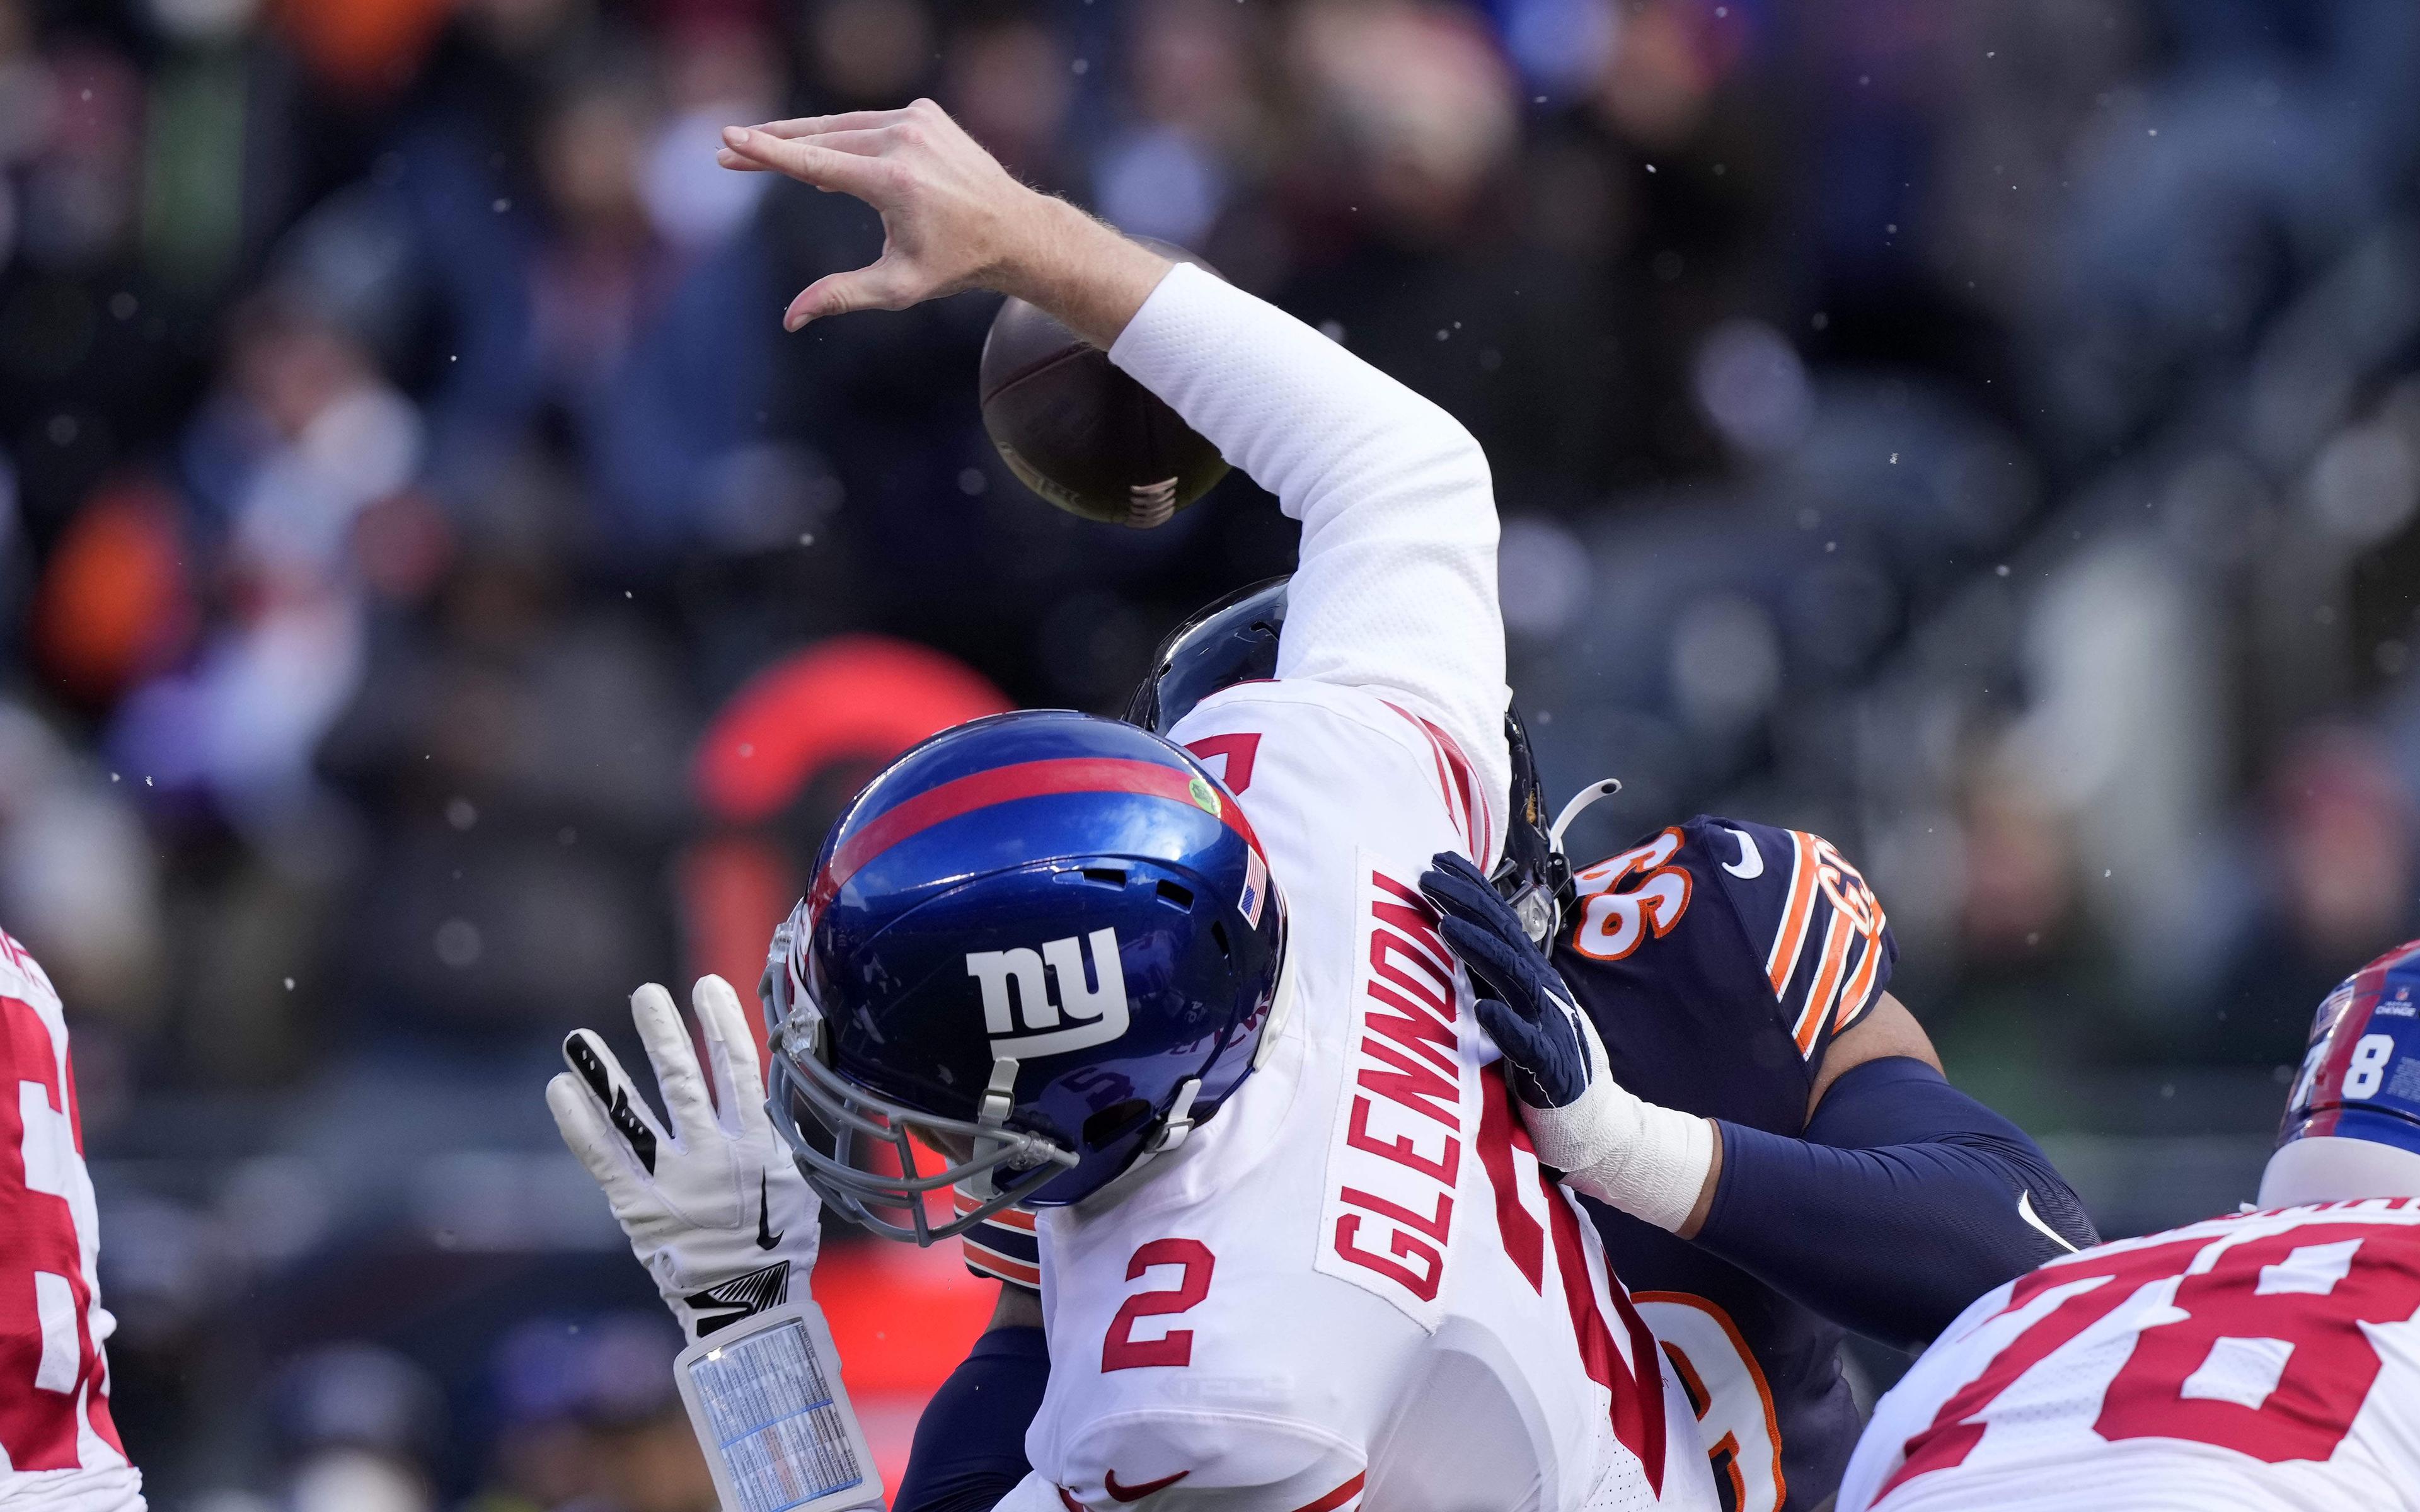 Jan 2, 2022; Chicago, Illinois, USA; New York Giants quarterback Mike Glennon (2) fumbles the ball after being hit by Chicago Bears outside linebacker Trevis Gipson (99) during the first quarter at Soldier Field. Mandatory Credit: Mike Dinovo-USA TODAY Sports / © Mike Dinovo-USA TODAY Sports